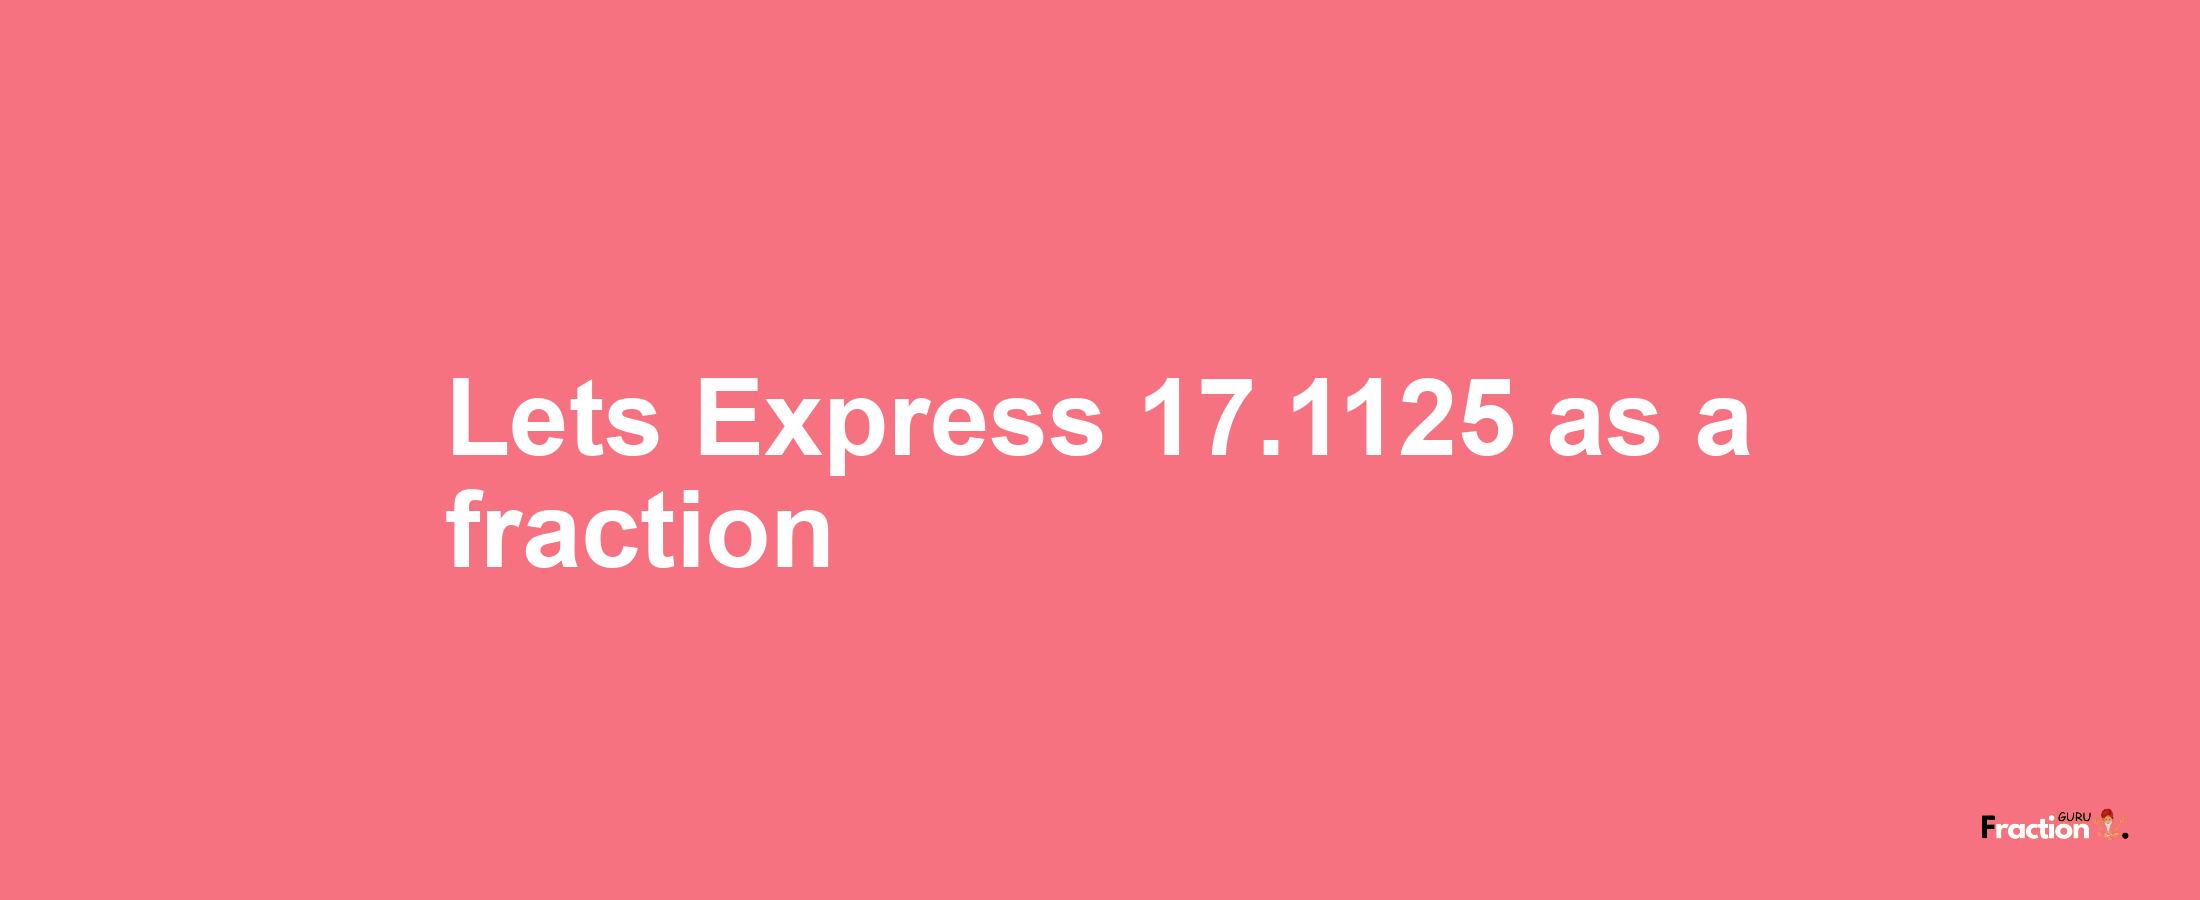 Lets Express 17.1125 as afraction